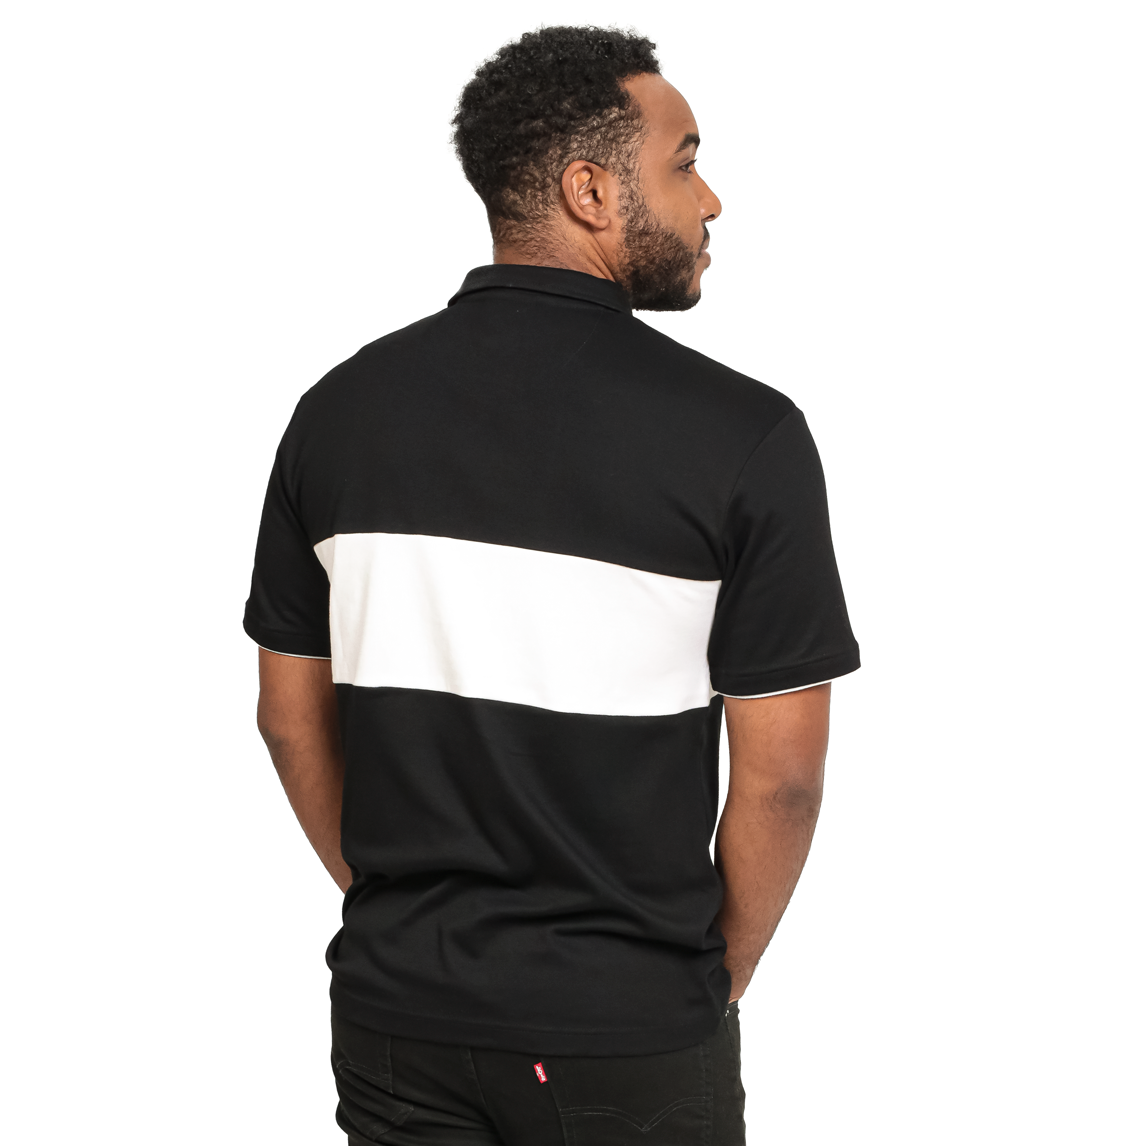 The back view of a man wearing a Guinness Black and White Toucan Short Sleeve Rugby shirt.